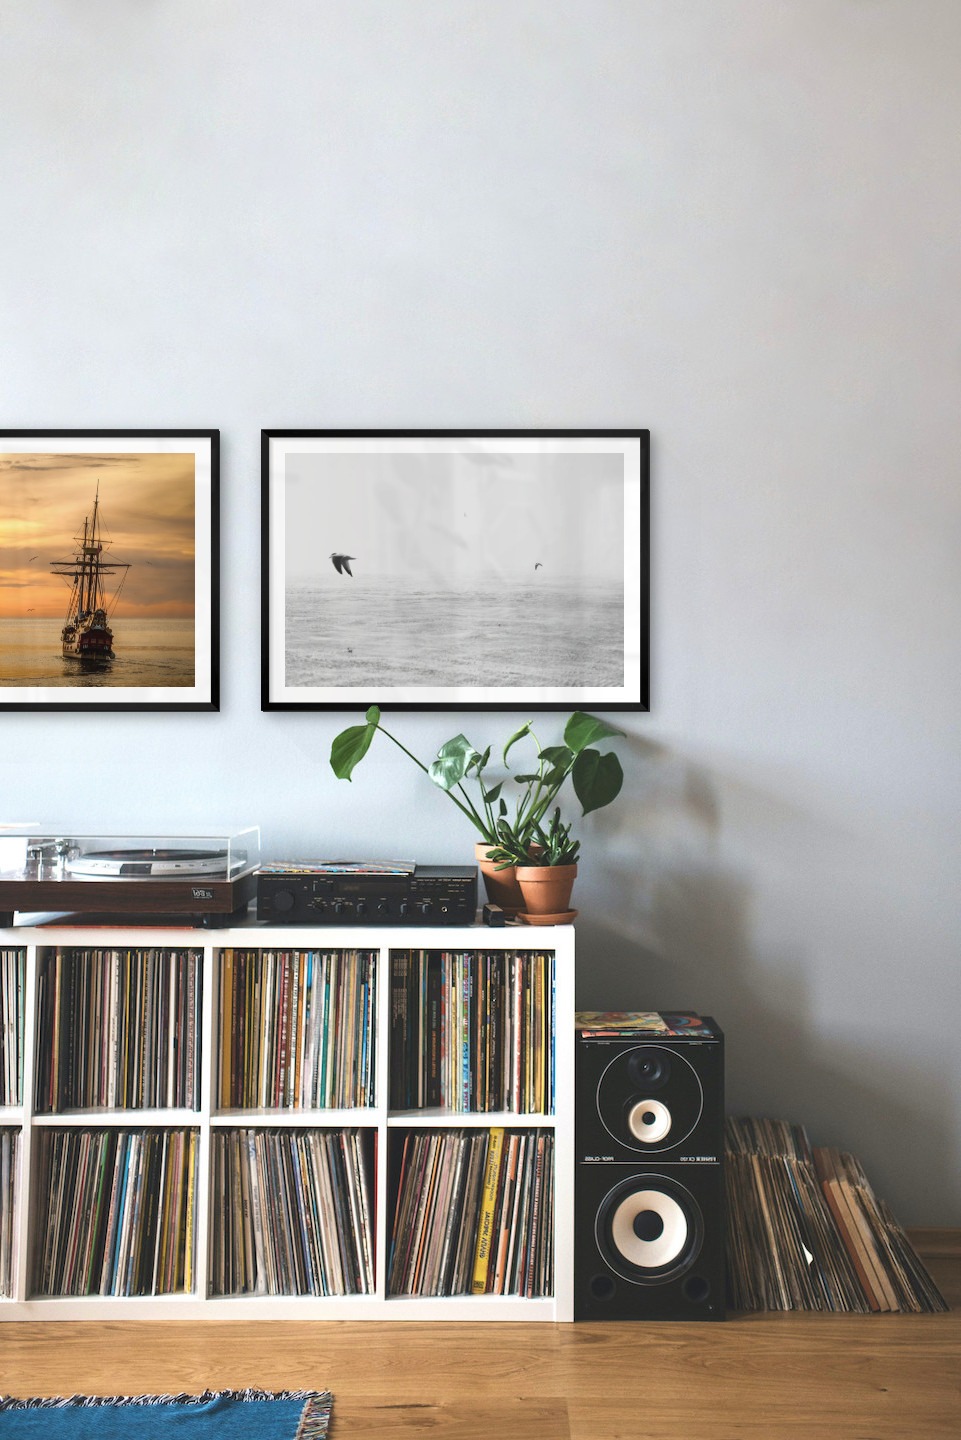 Gallery wall with picture frames in black in sizes 50x70 with prints "Ships at sea" and "Birds over the sea"